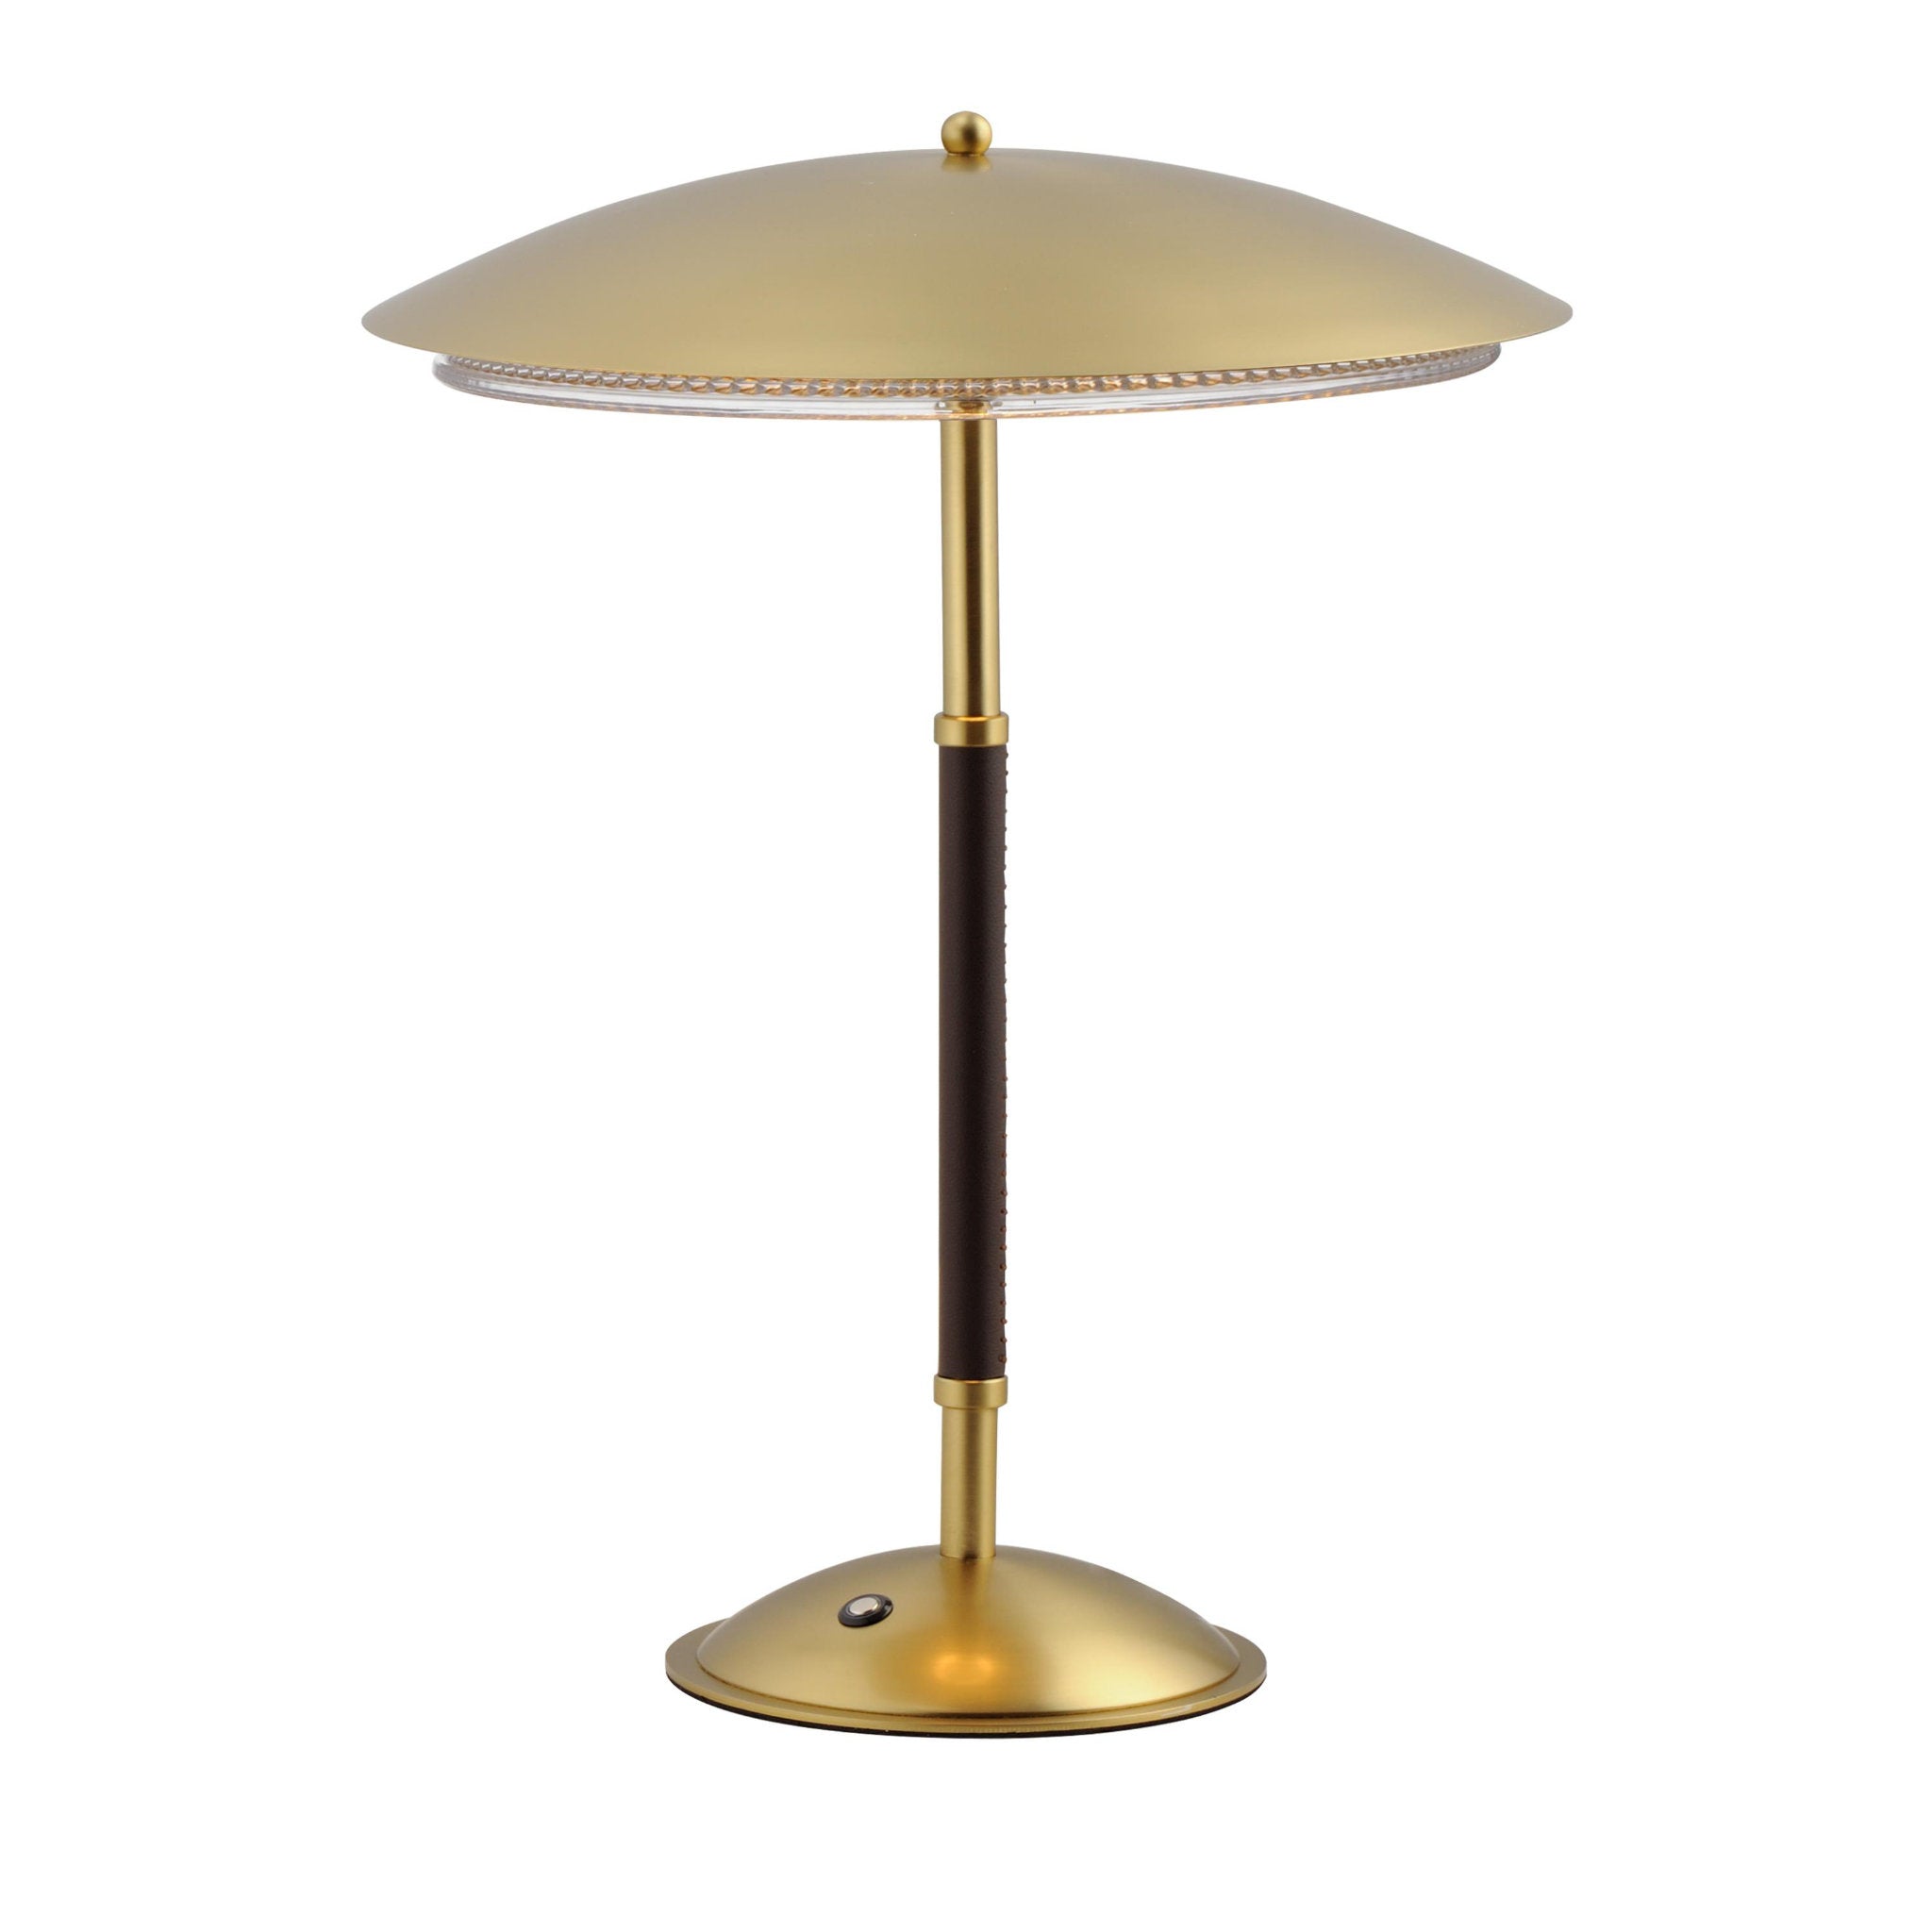 Studio M SM81868CRNAB Prismatic LED Table Lamp in Natural Aged Brass by Mat Sanders